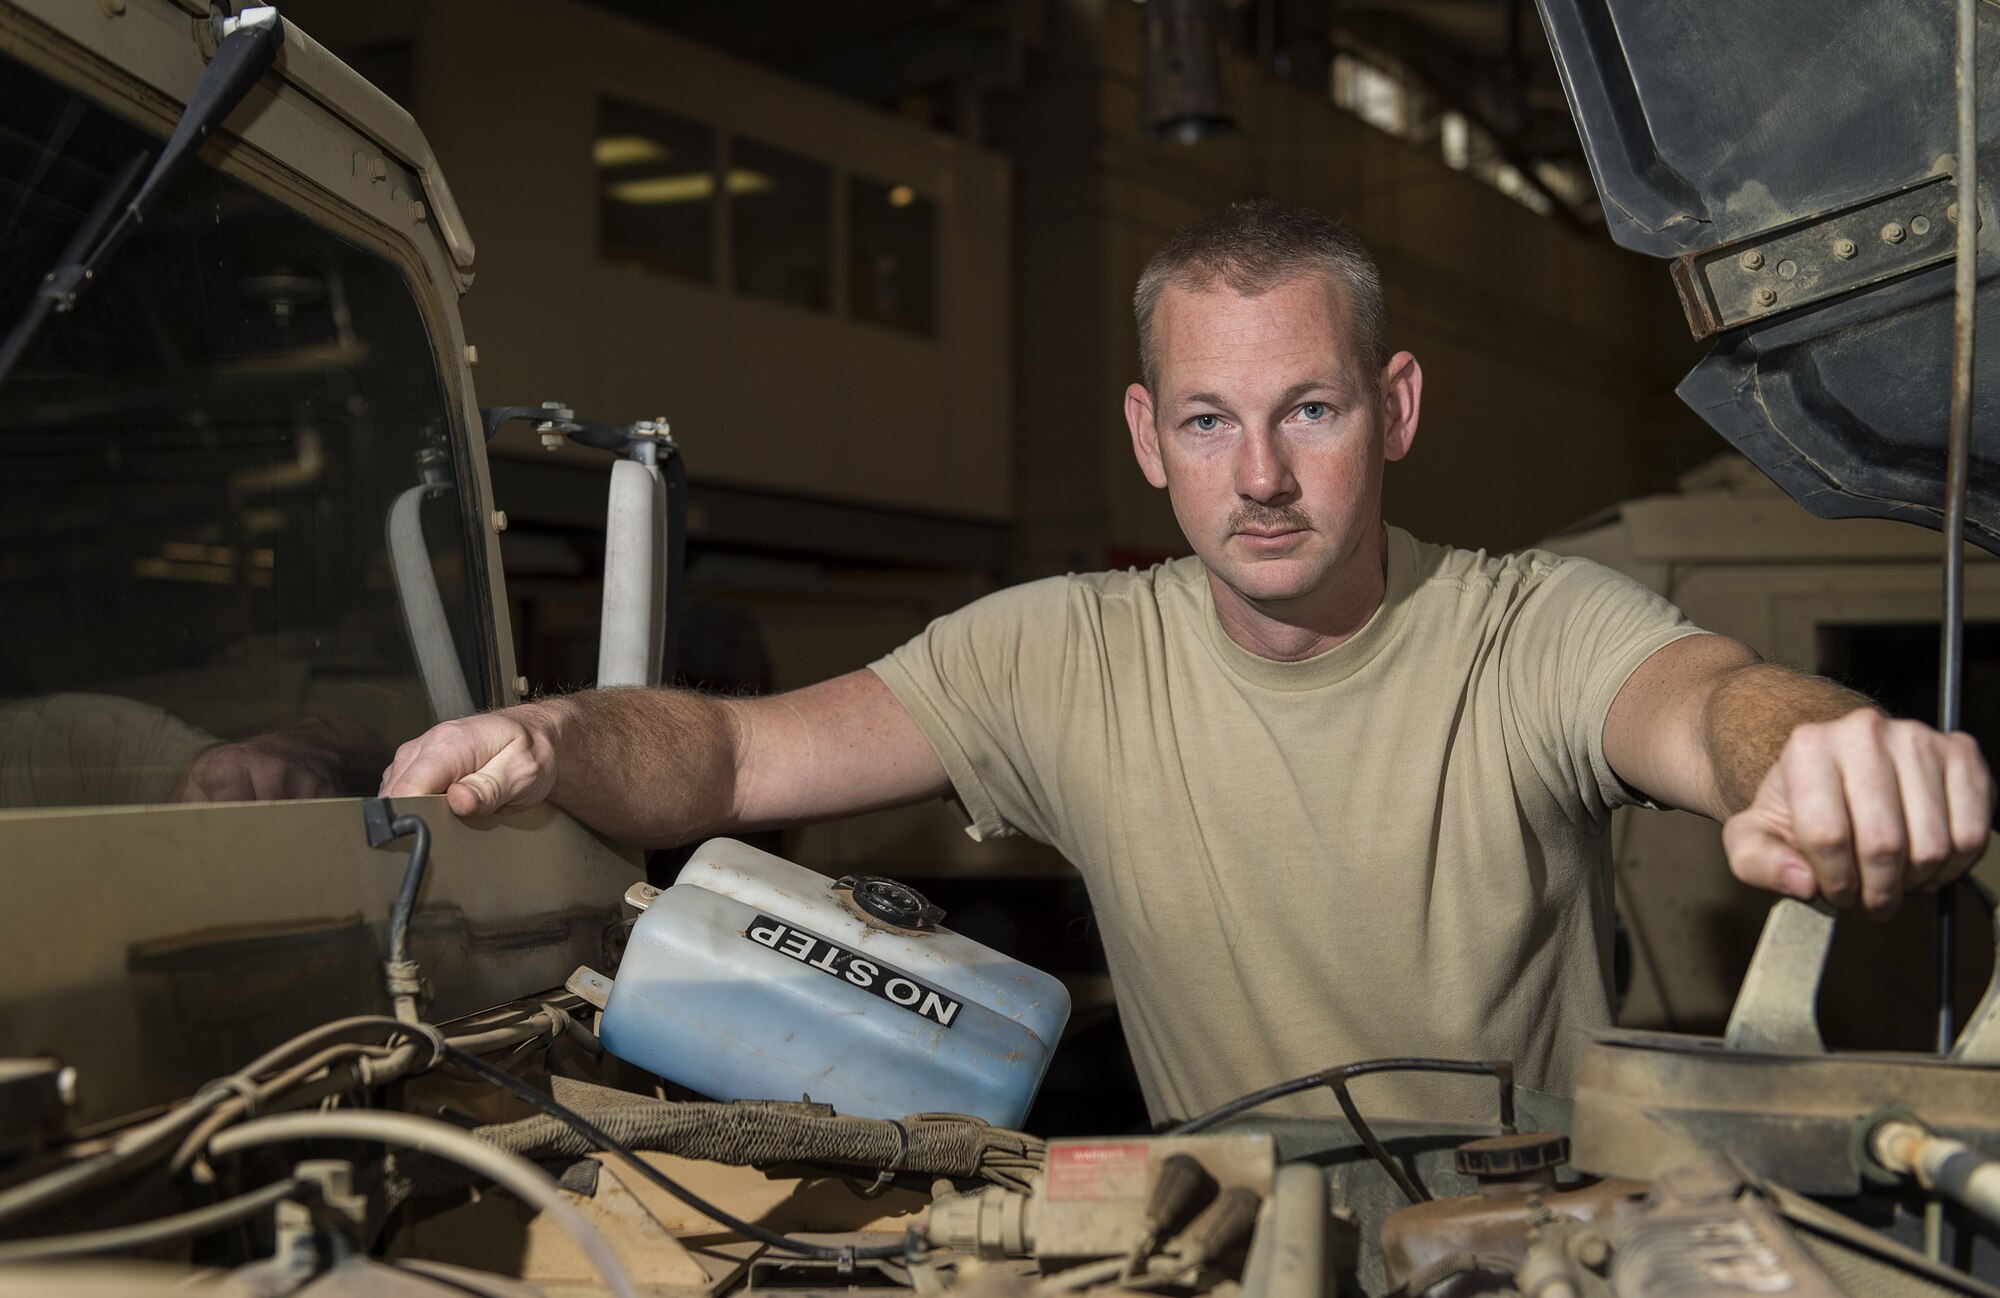 U.S. Air Force Tech. Sgt Robert Black, NCO in charge of main shop assigned to the 97th Logistics Readiness Squadron, poses for a portrait at the 97th LRS vehicle maintenance shop, Feb. 9, 2018, at Altus Air Force Base, Okla.